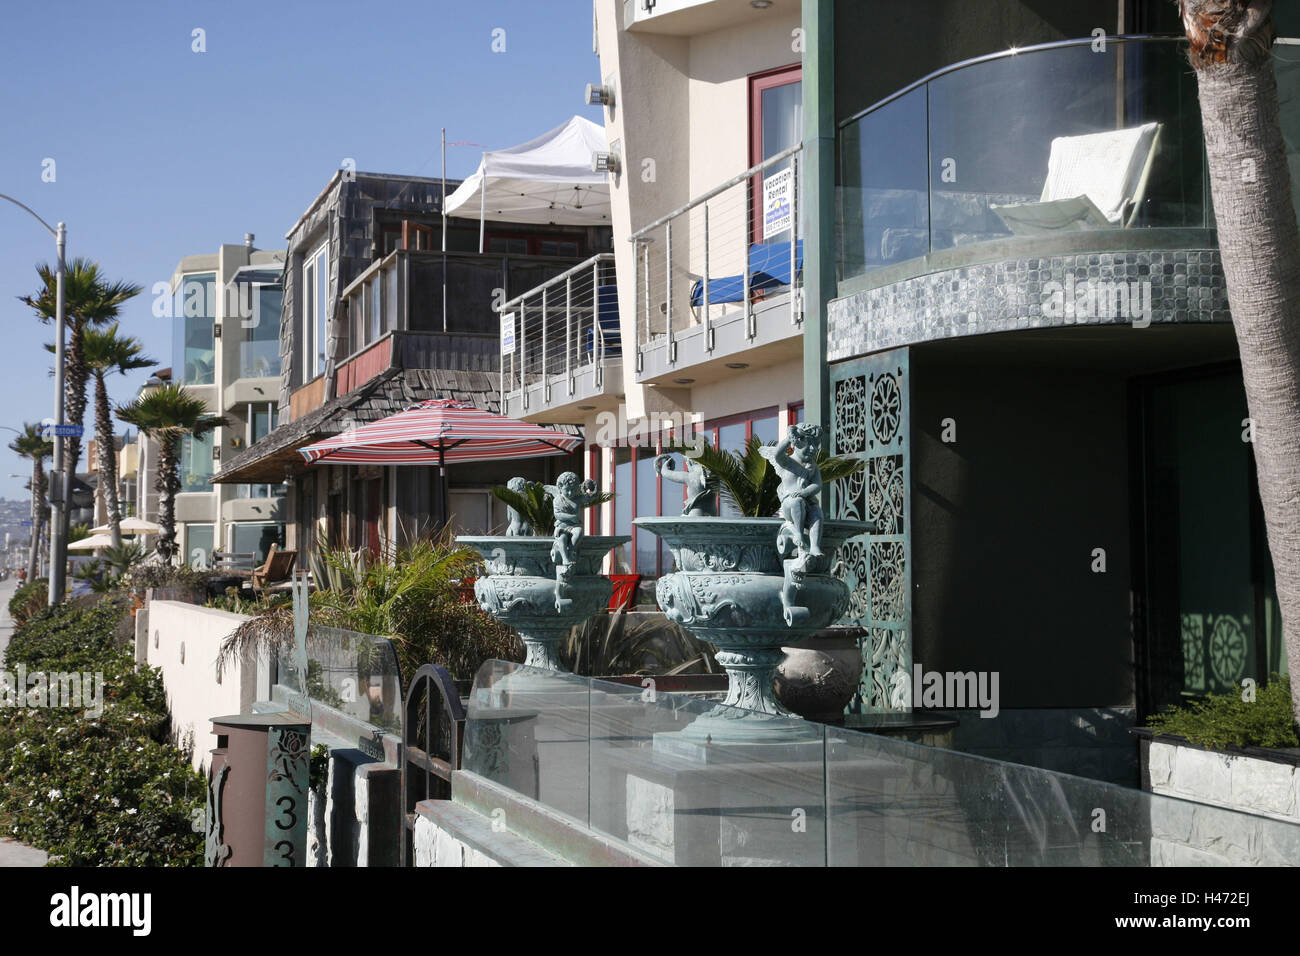 The USA, California, San Diego, mission Bay, seafront, houses, Stock Photo